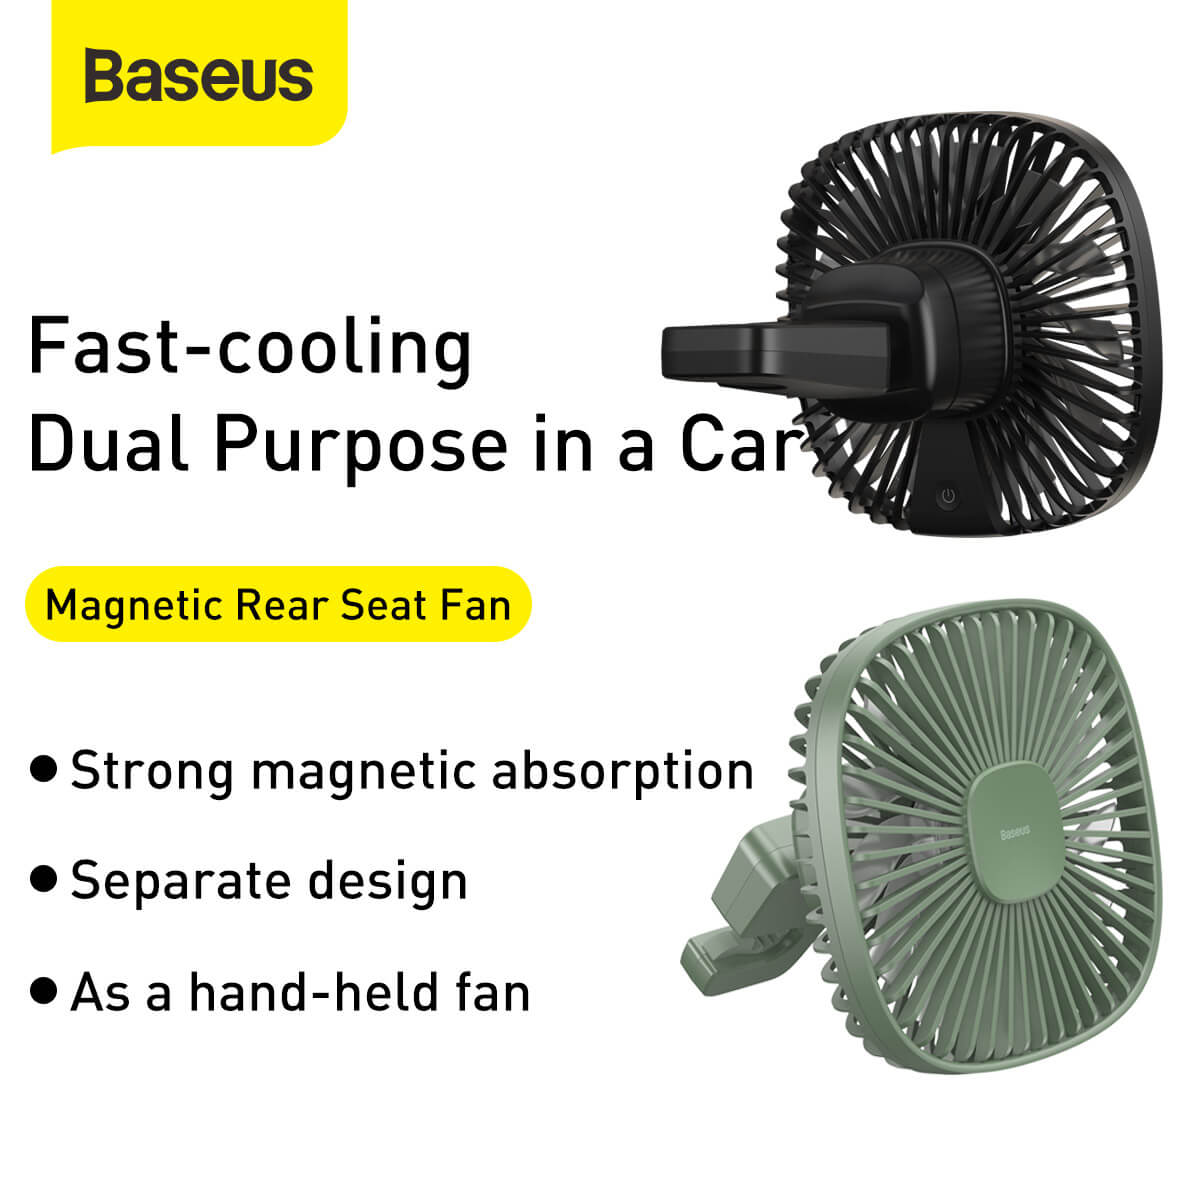 Baseus Natural Wind Magnetic Rear Seat